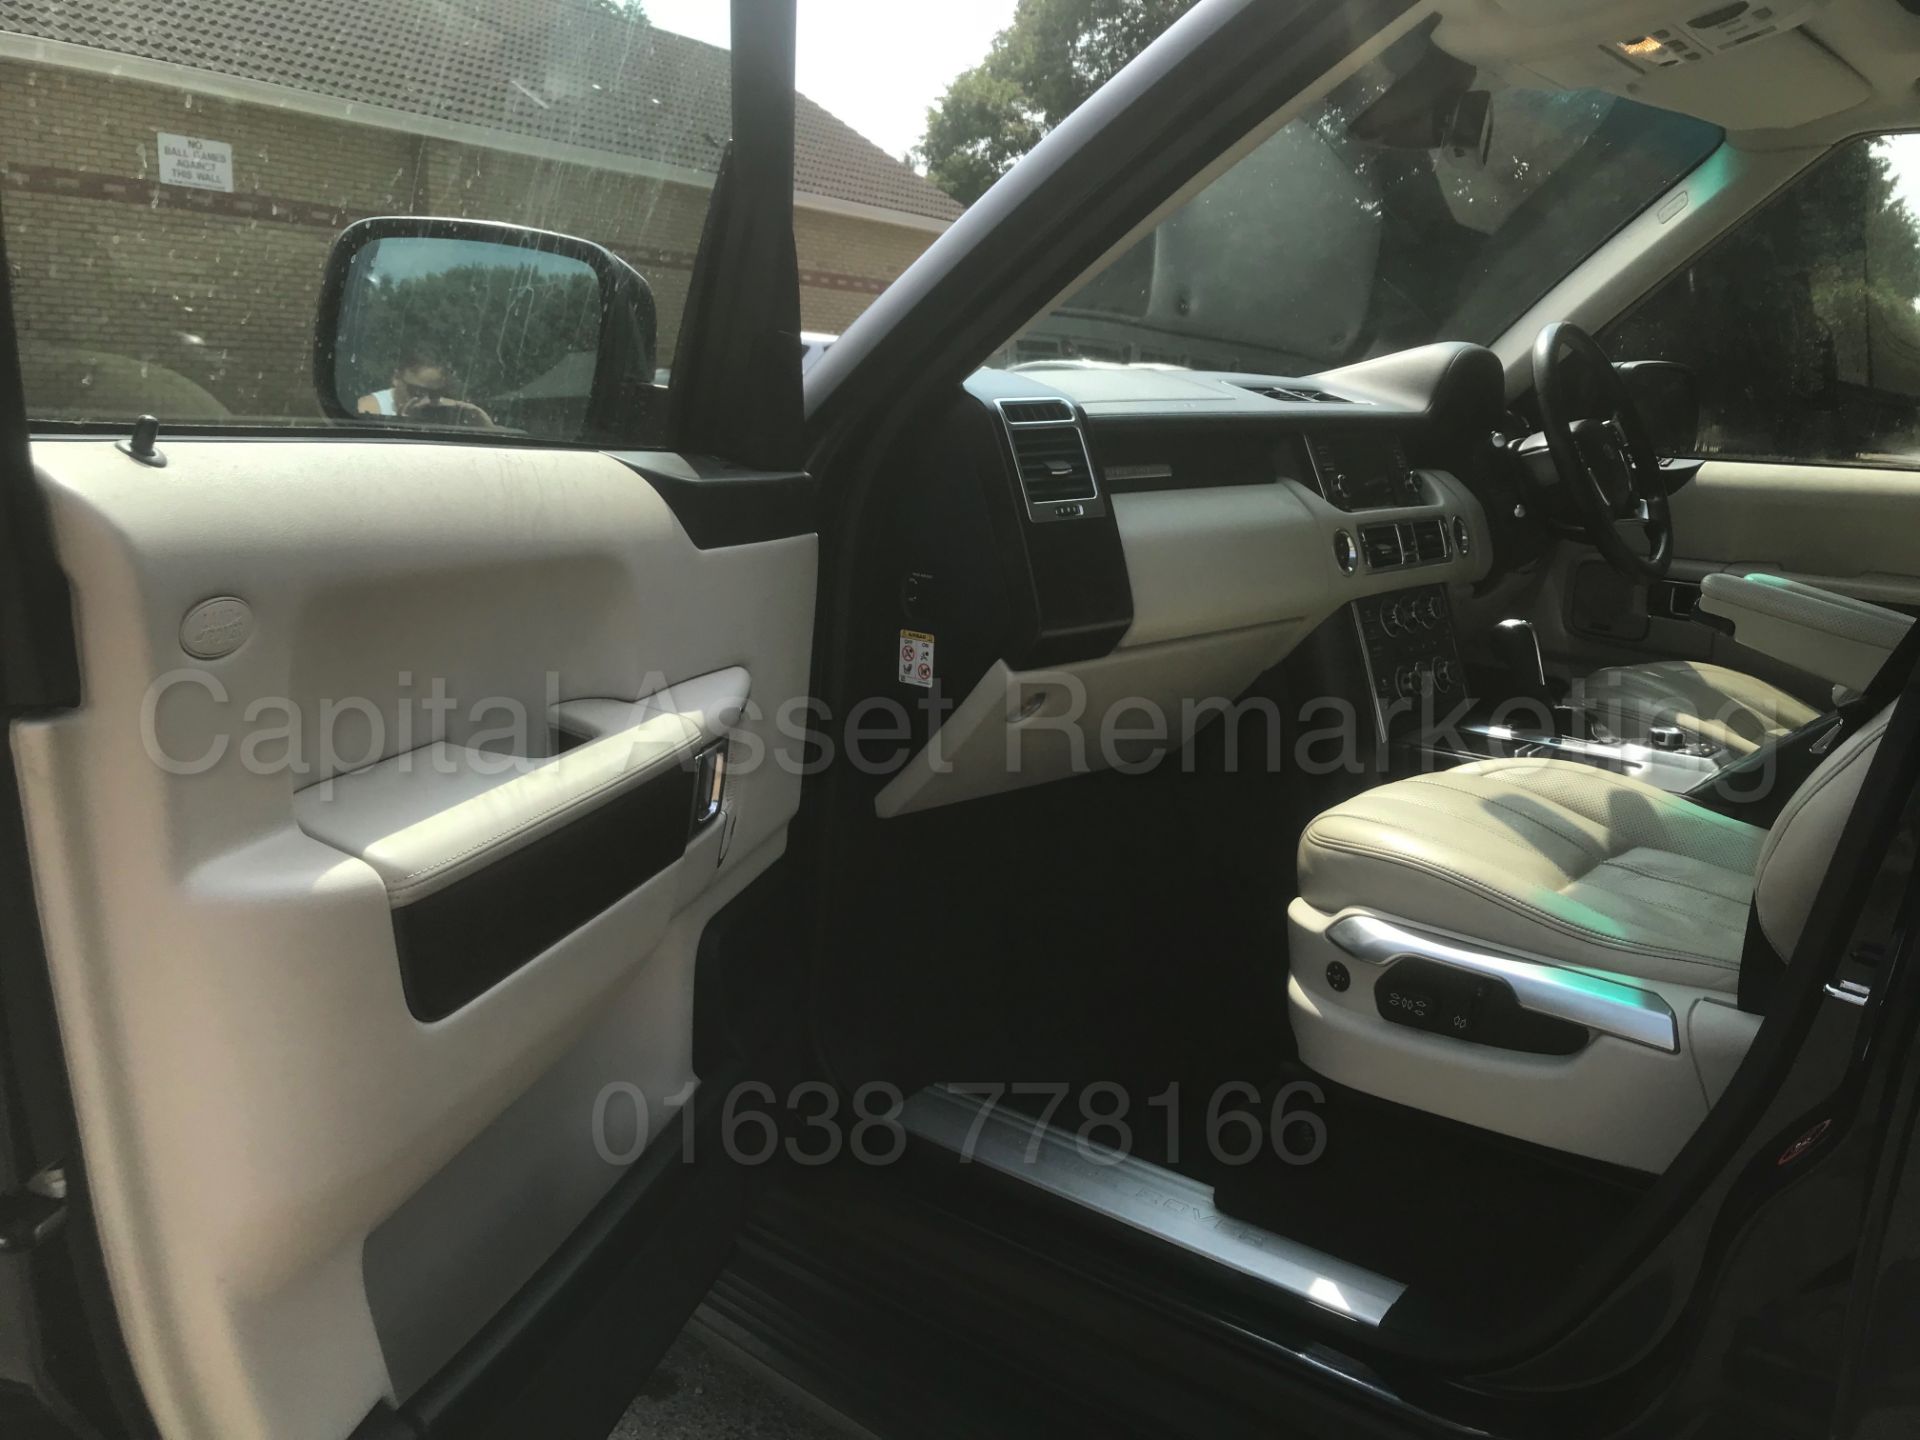 (On Sale) RANGE ROVER VOGUE **SE EDITION** (2010 - FACELIFT EDITION) 'TDV8 - 268 BHP - AUTO' **WOW** - Image 24 of 62